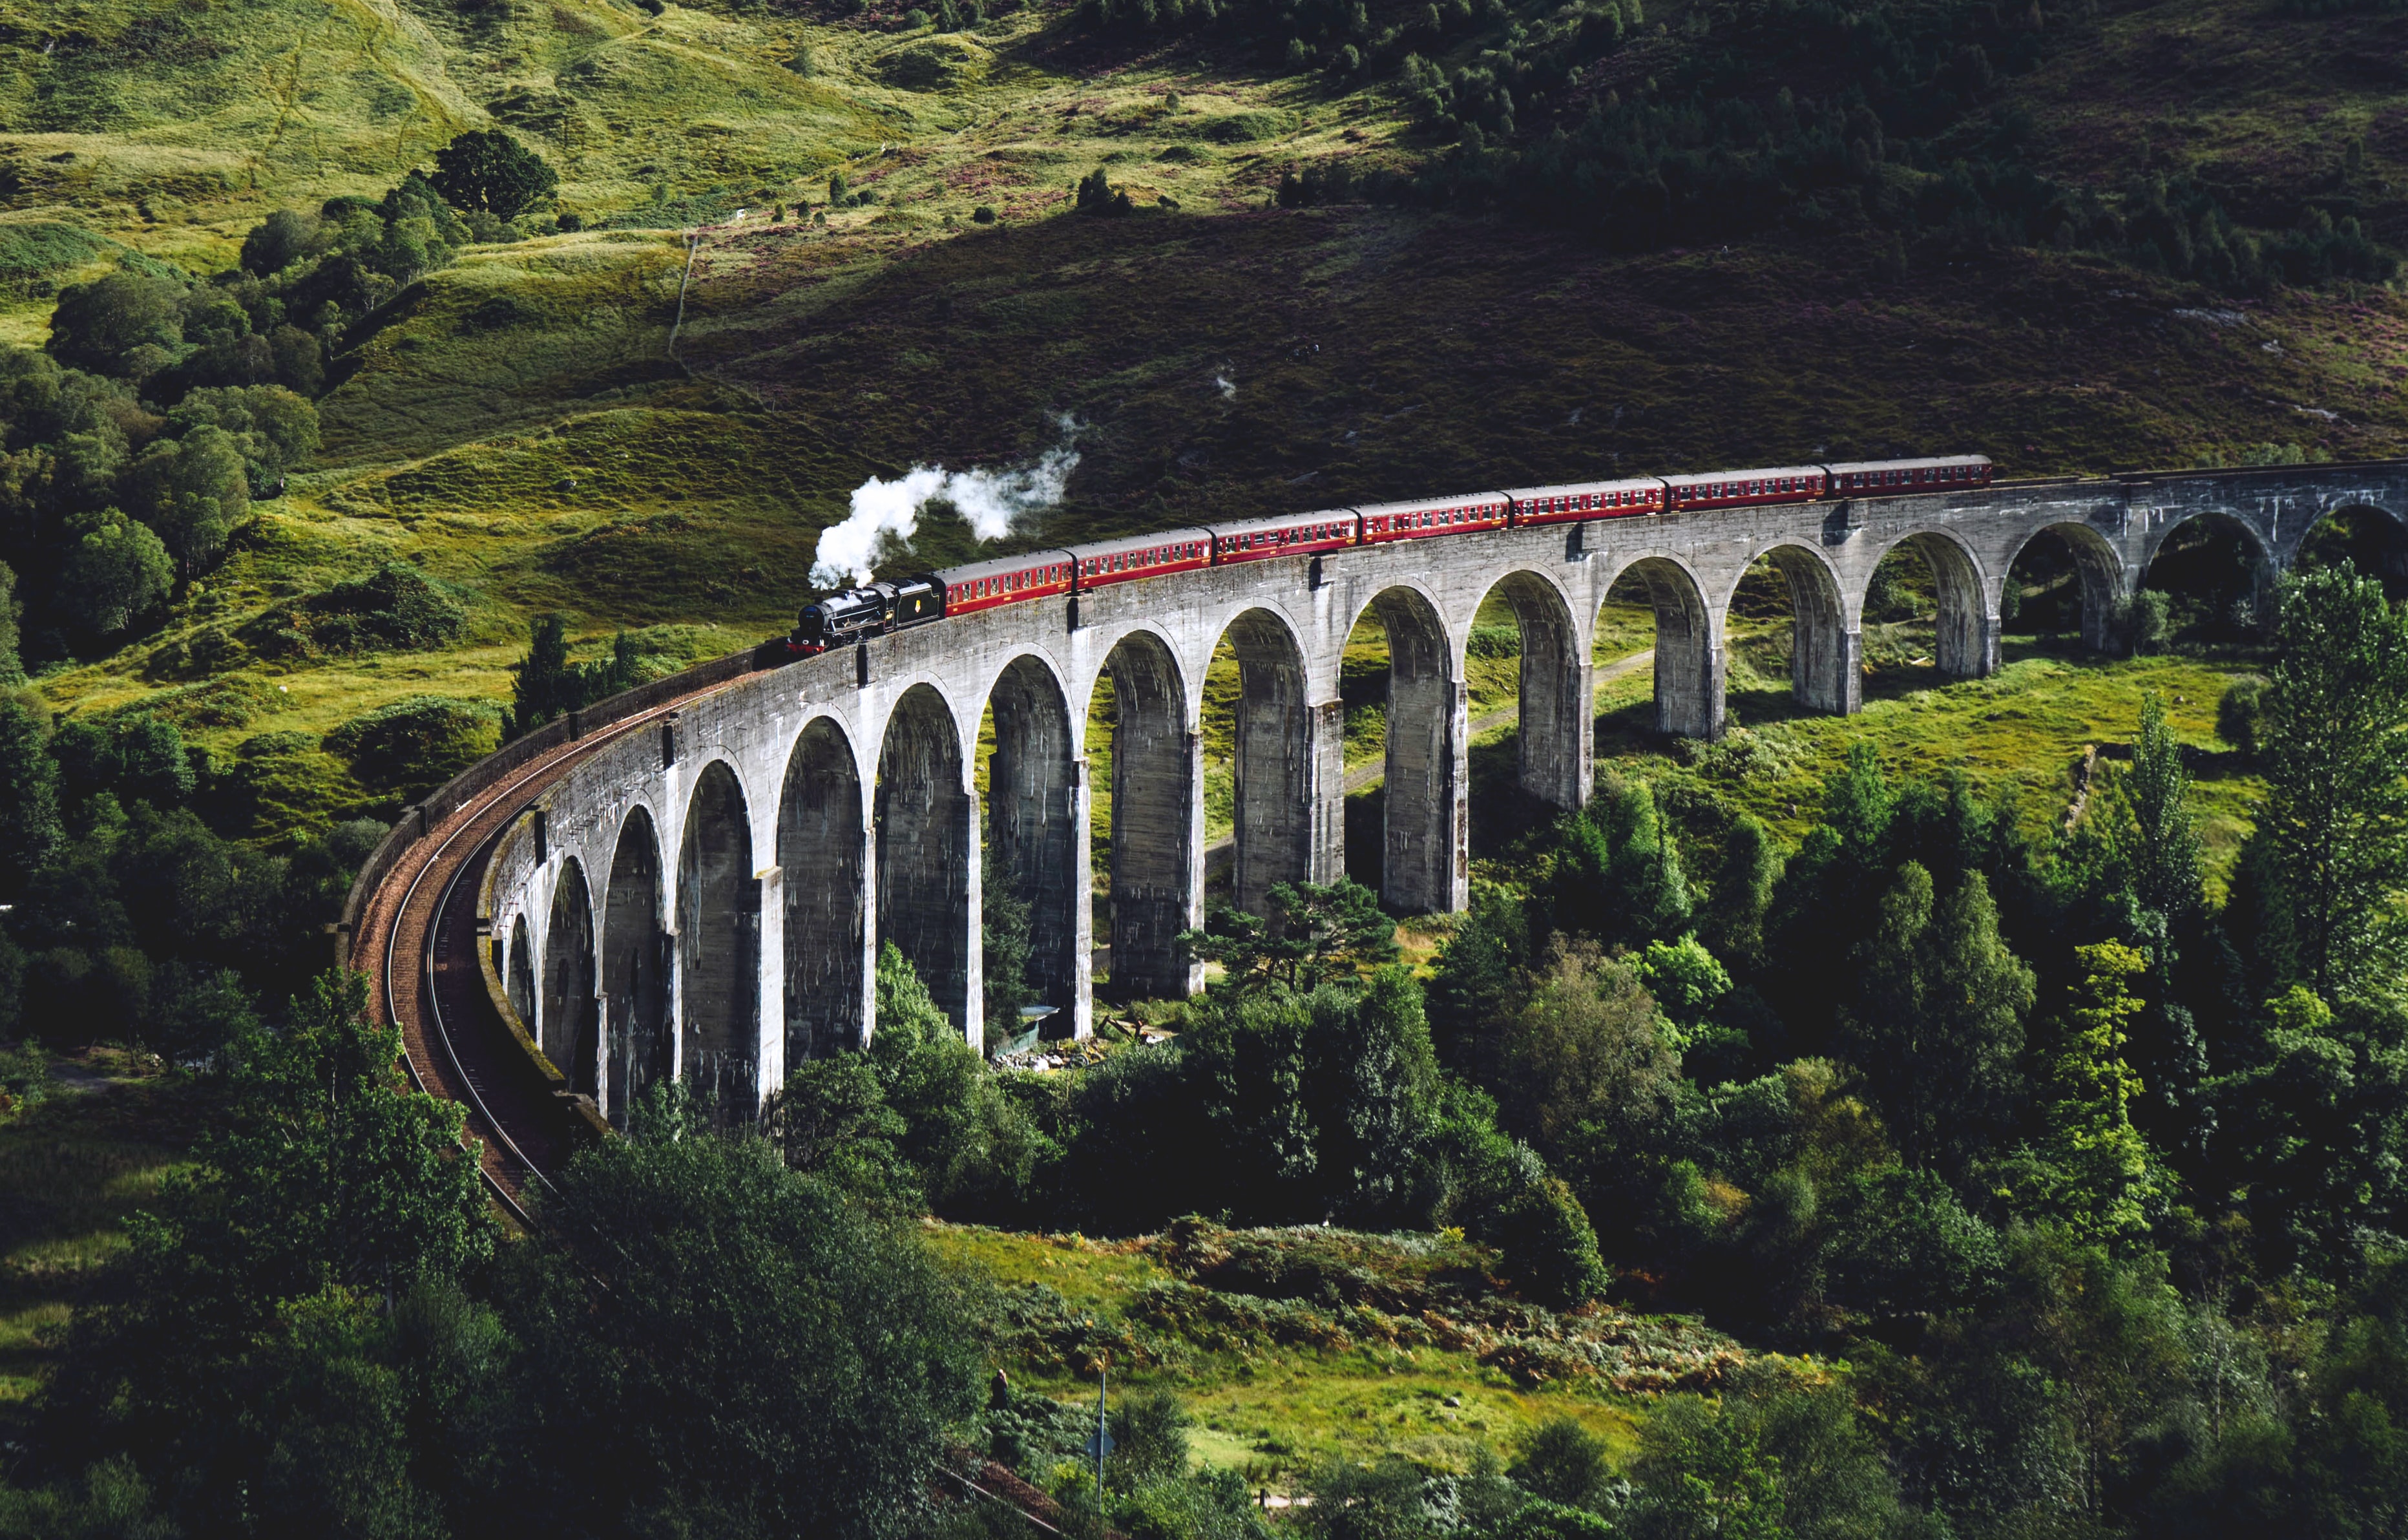 Steam train passing over an arched bridge in hilly landscapes of Scotland